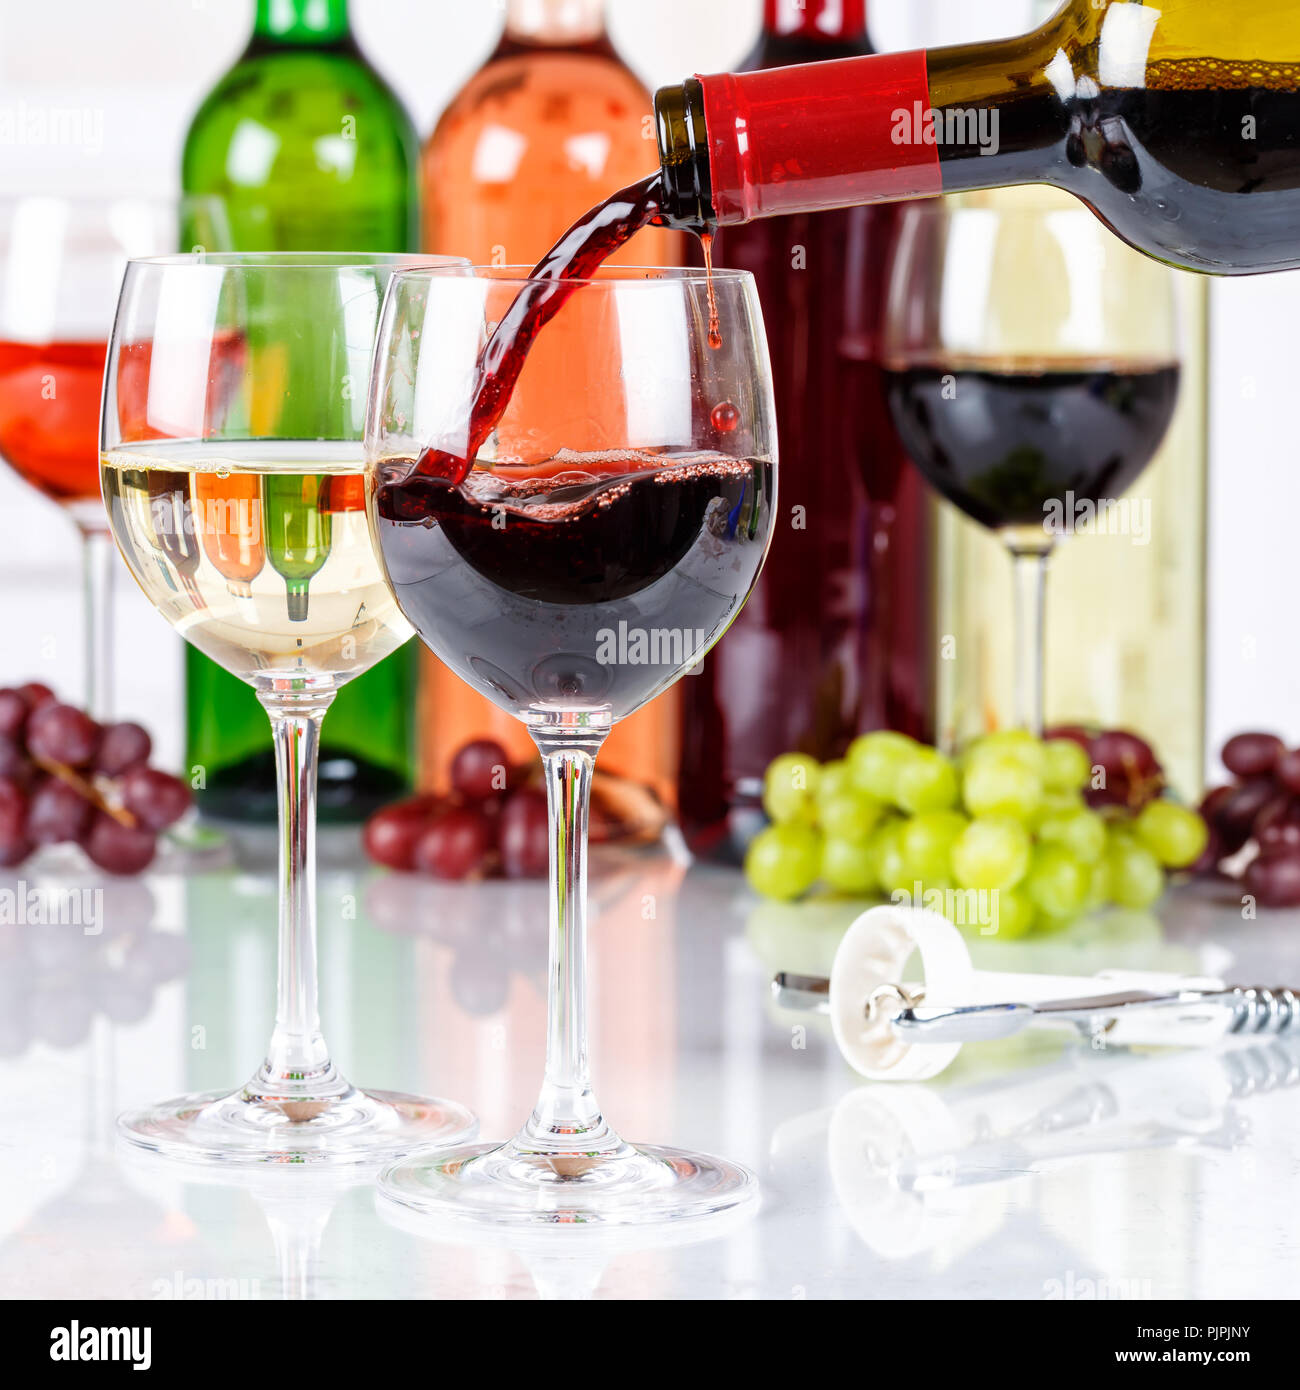 Wine pouring glass bottle red square pour alcohol Stock Photo